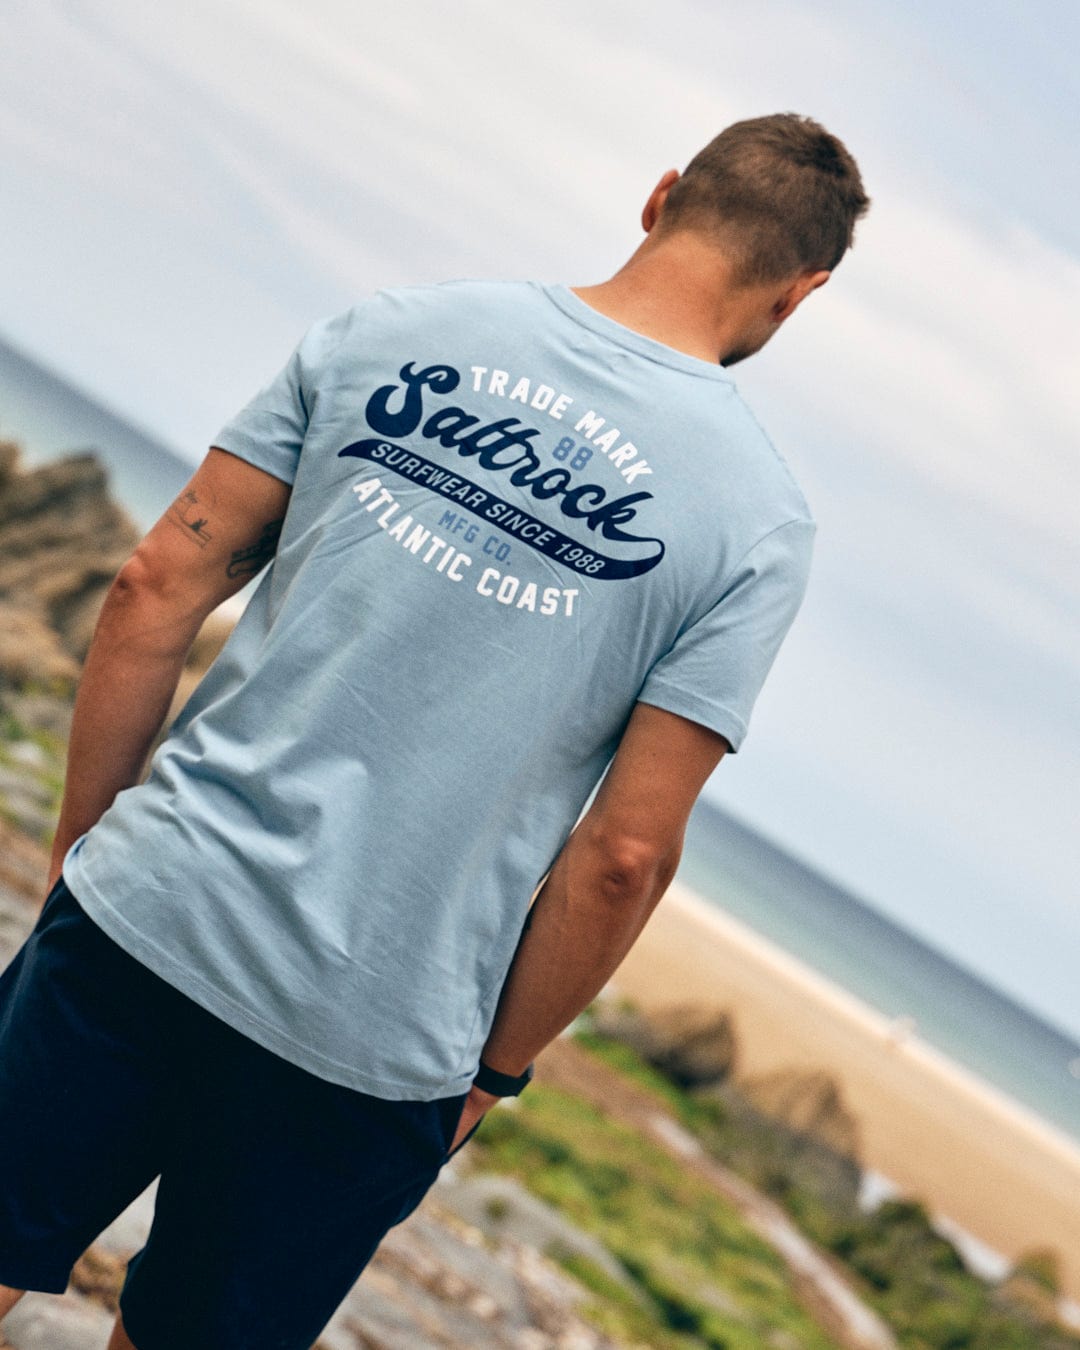 A man is standing on a rocky beach, gazing at the ocean. He is wearing a Home Run - Mens T-Shirt - Blue with Saltrock branding on the back and dark shorts.